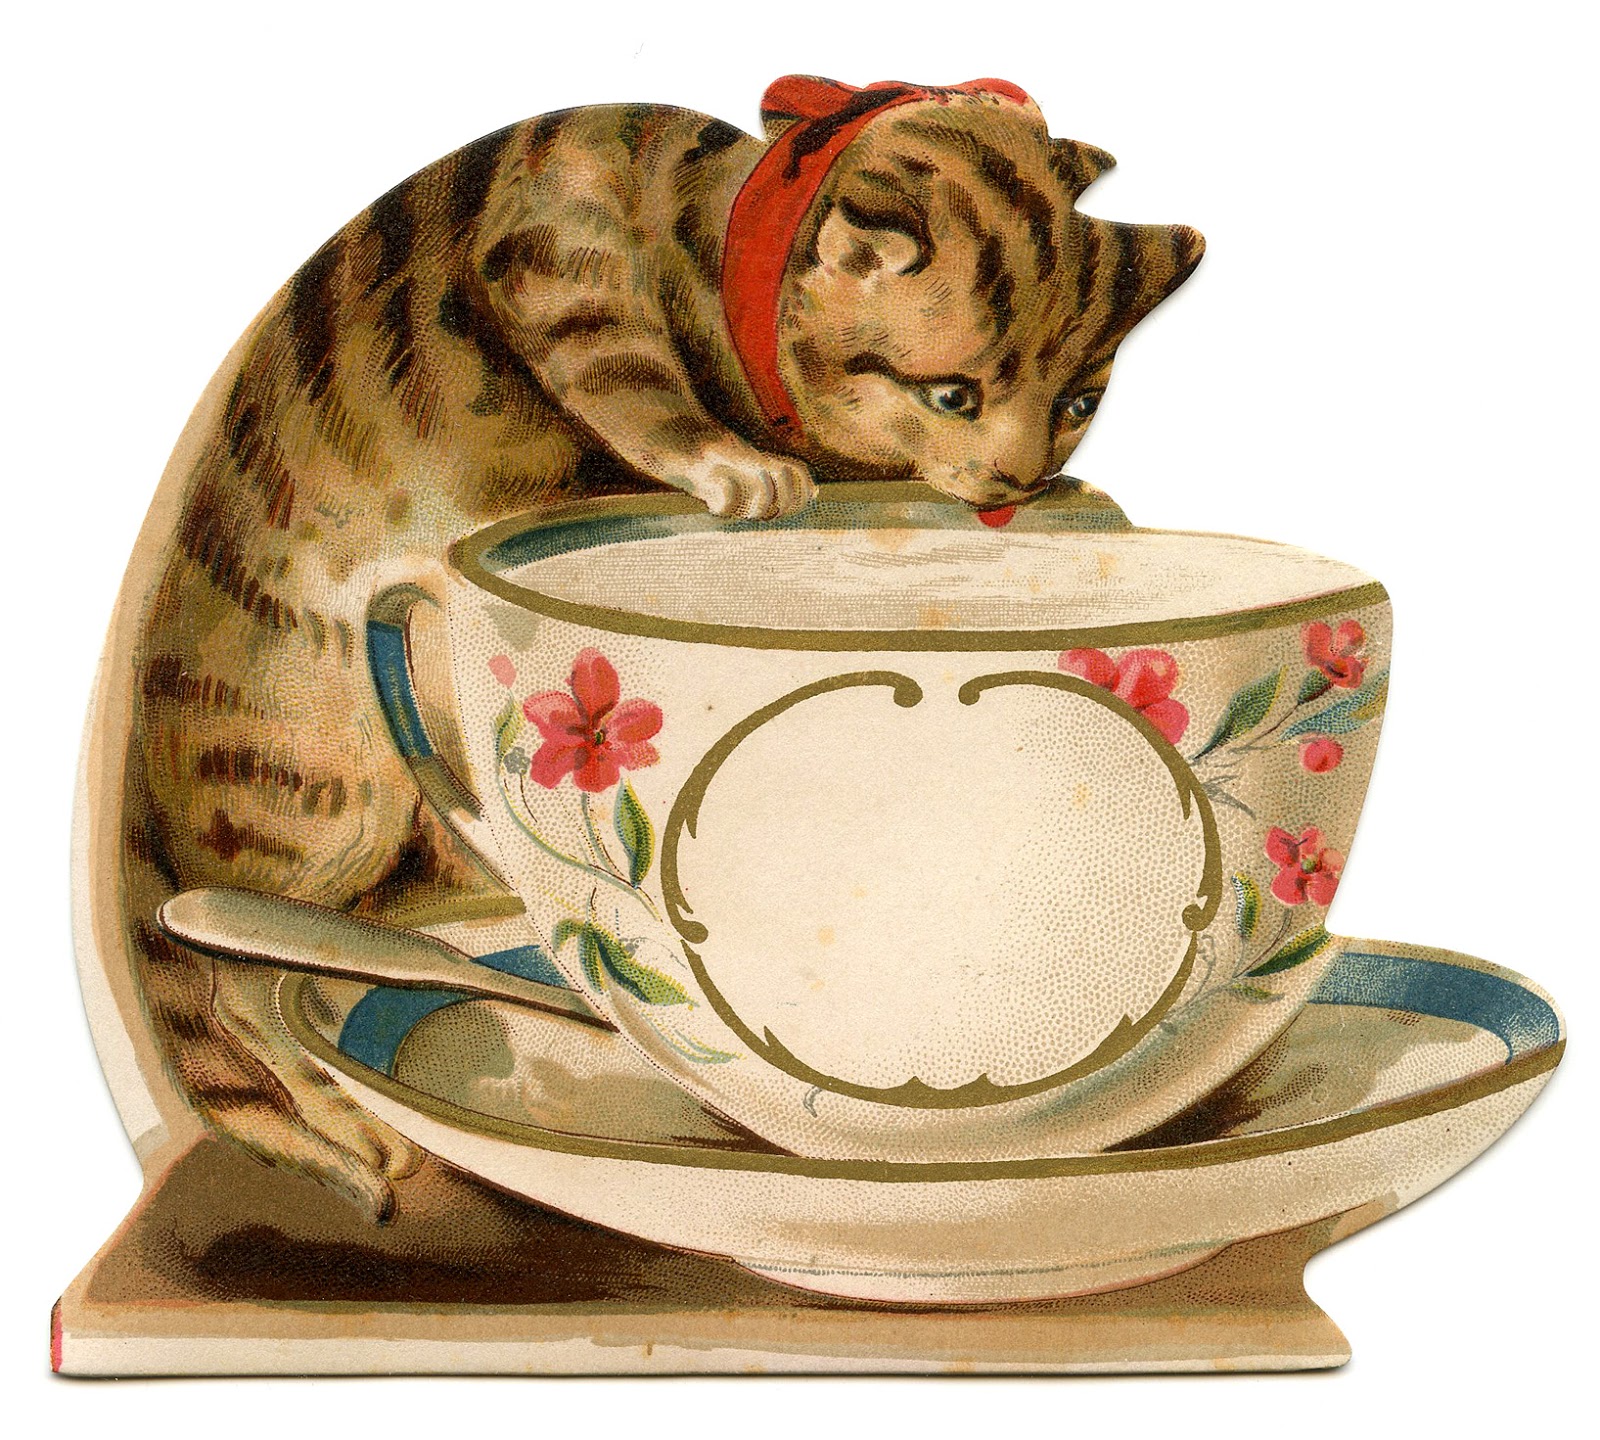 http://thegraphicsfairy.com/wp-content/uploads/2013/04/Vintage-Image-Cat-TeaCup-GraphicsFairy3.jpg